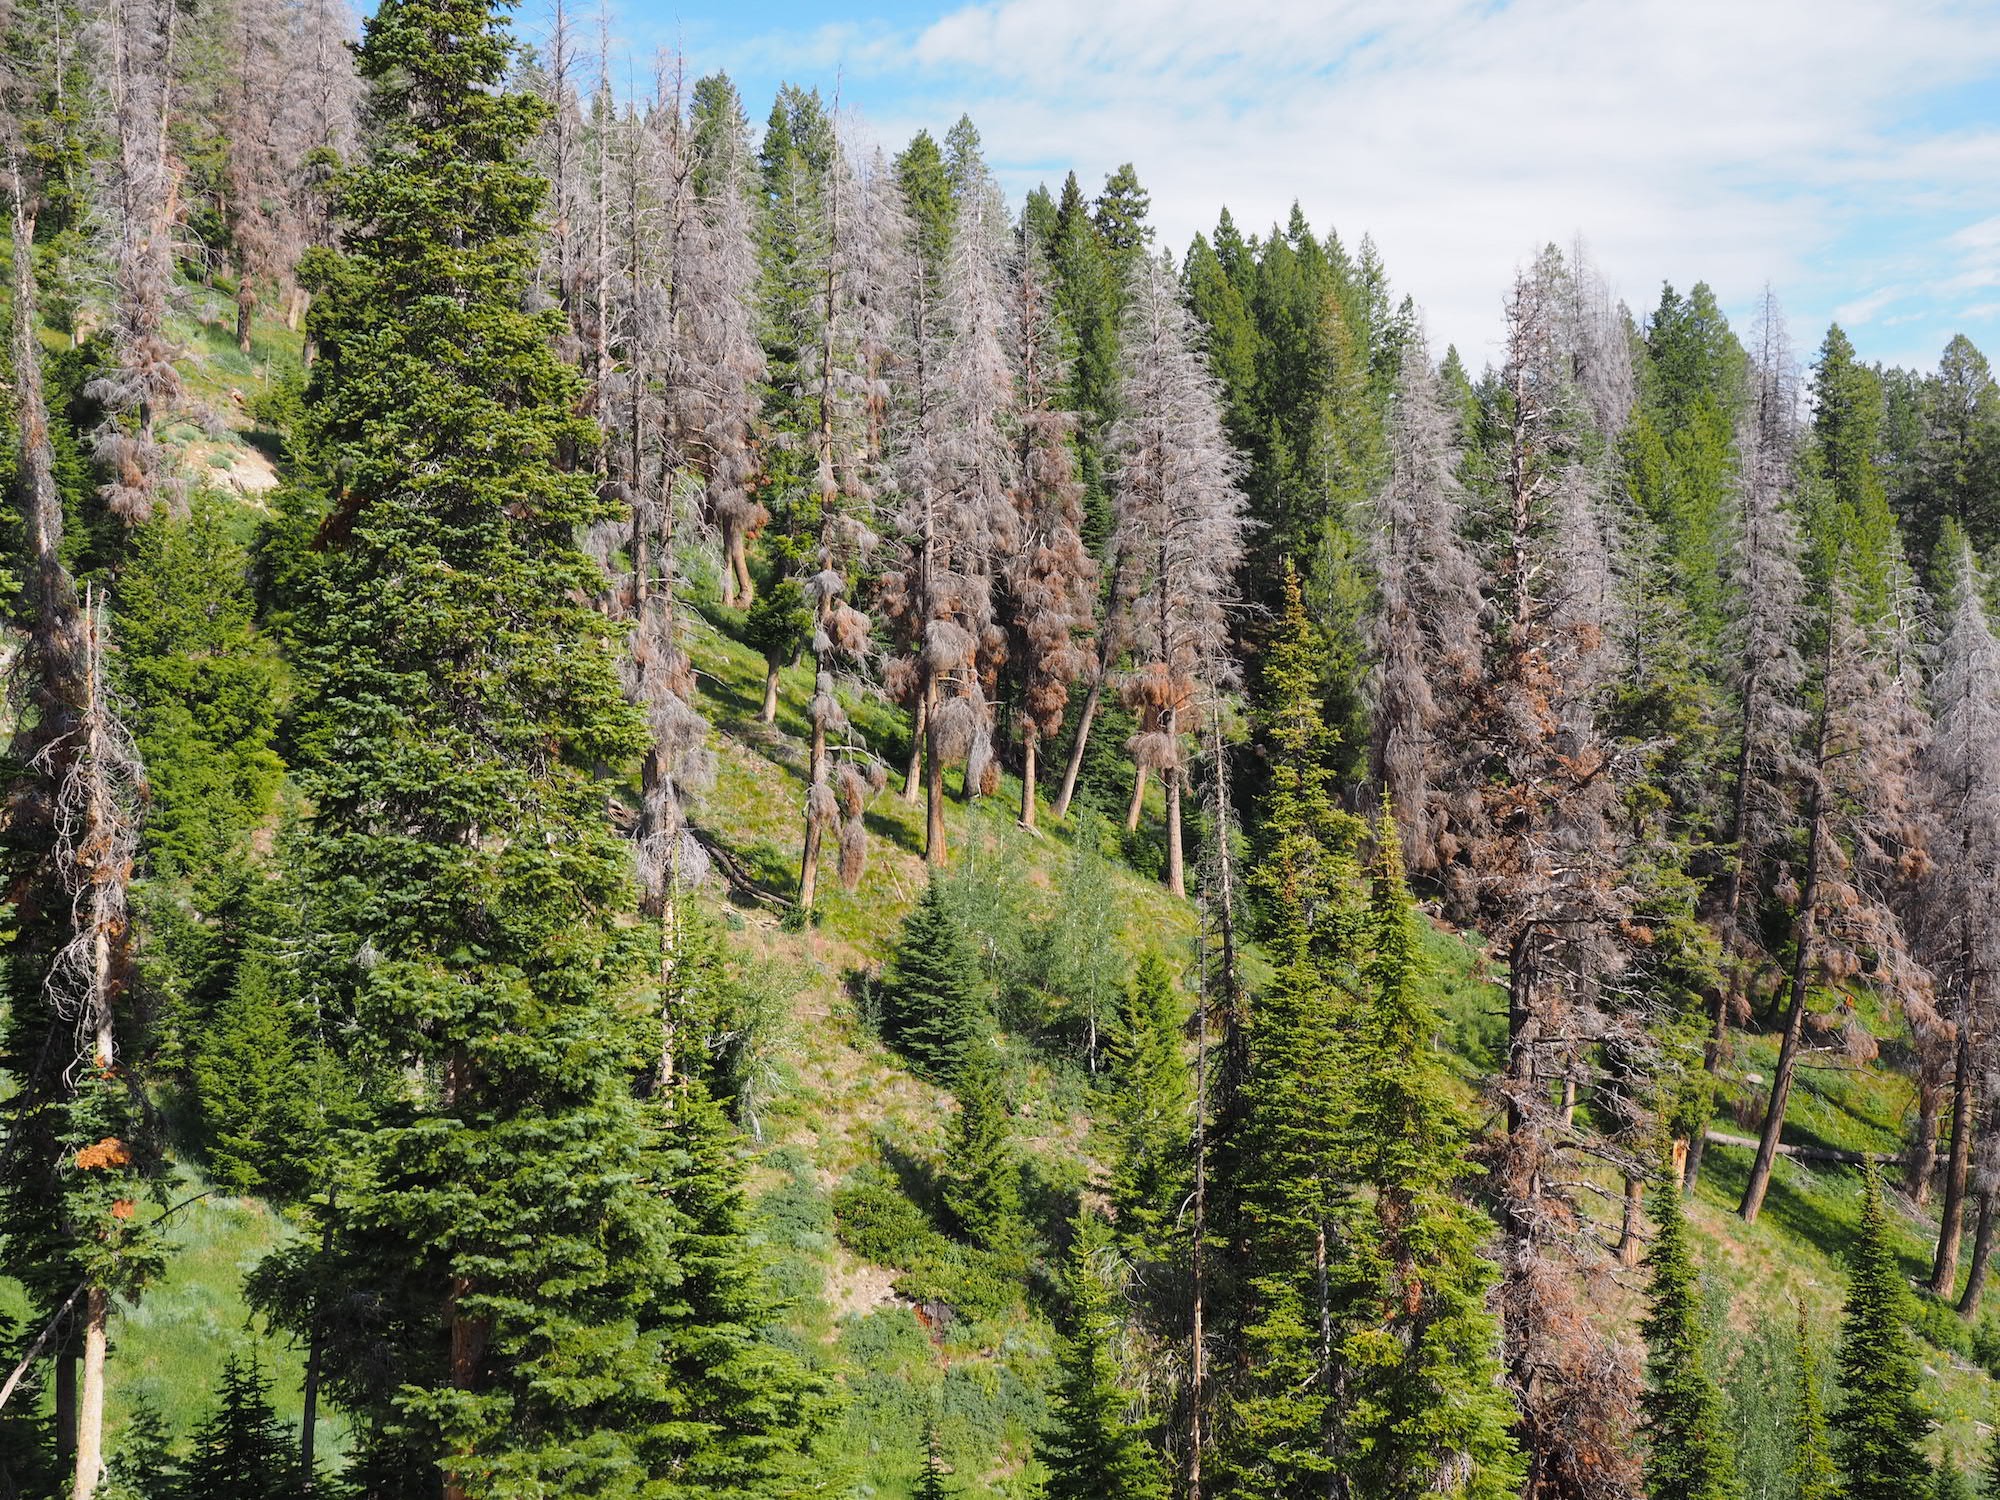 Pine trees are shown, some healthy and some affected by beetle kill.